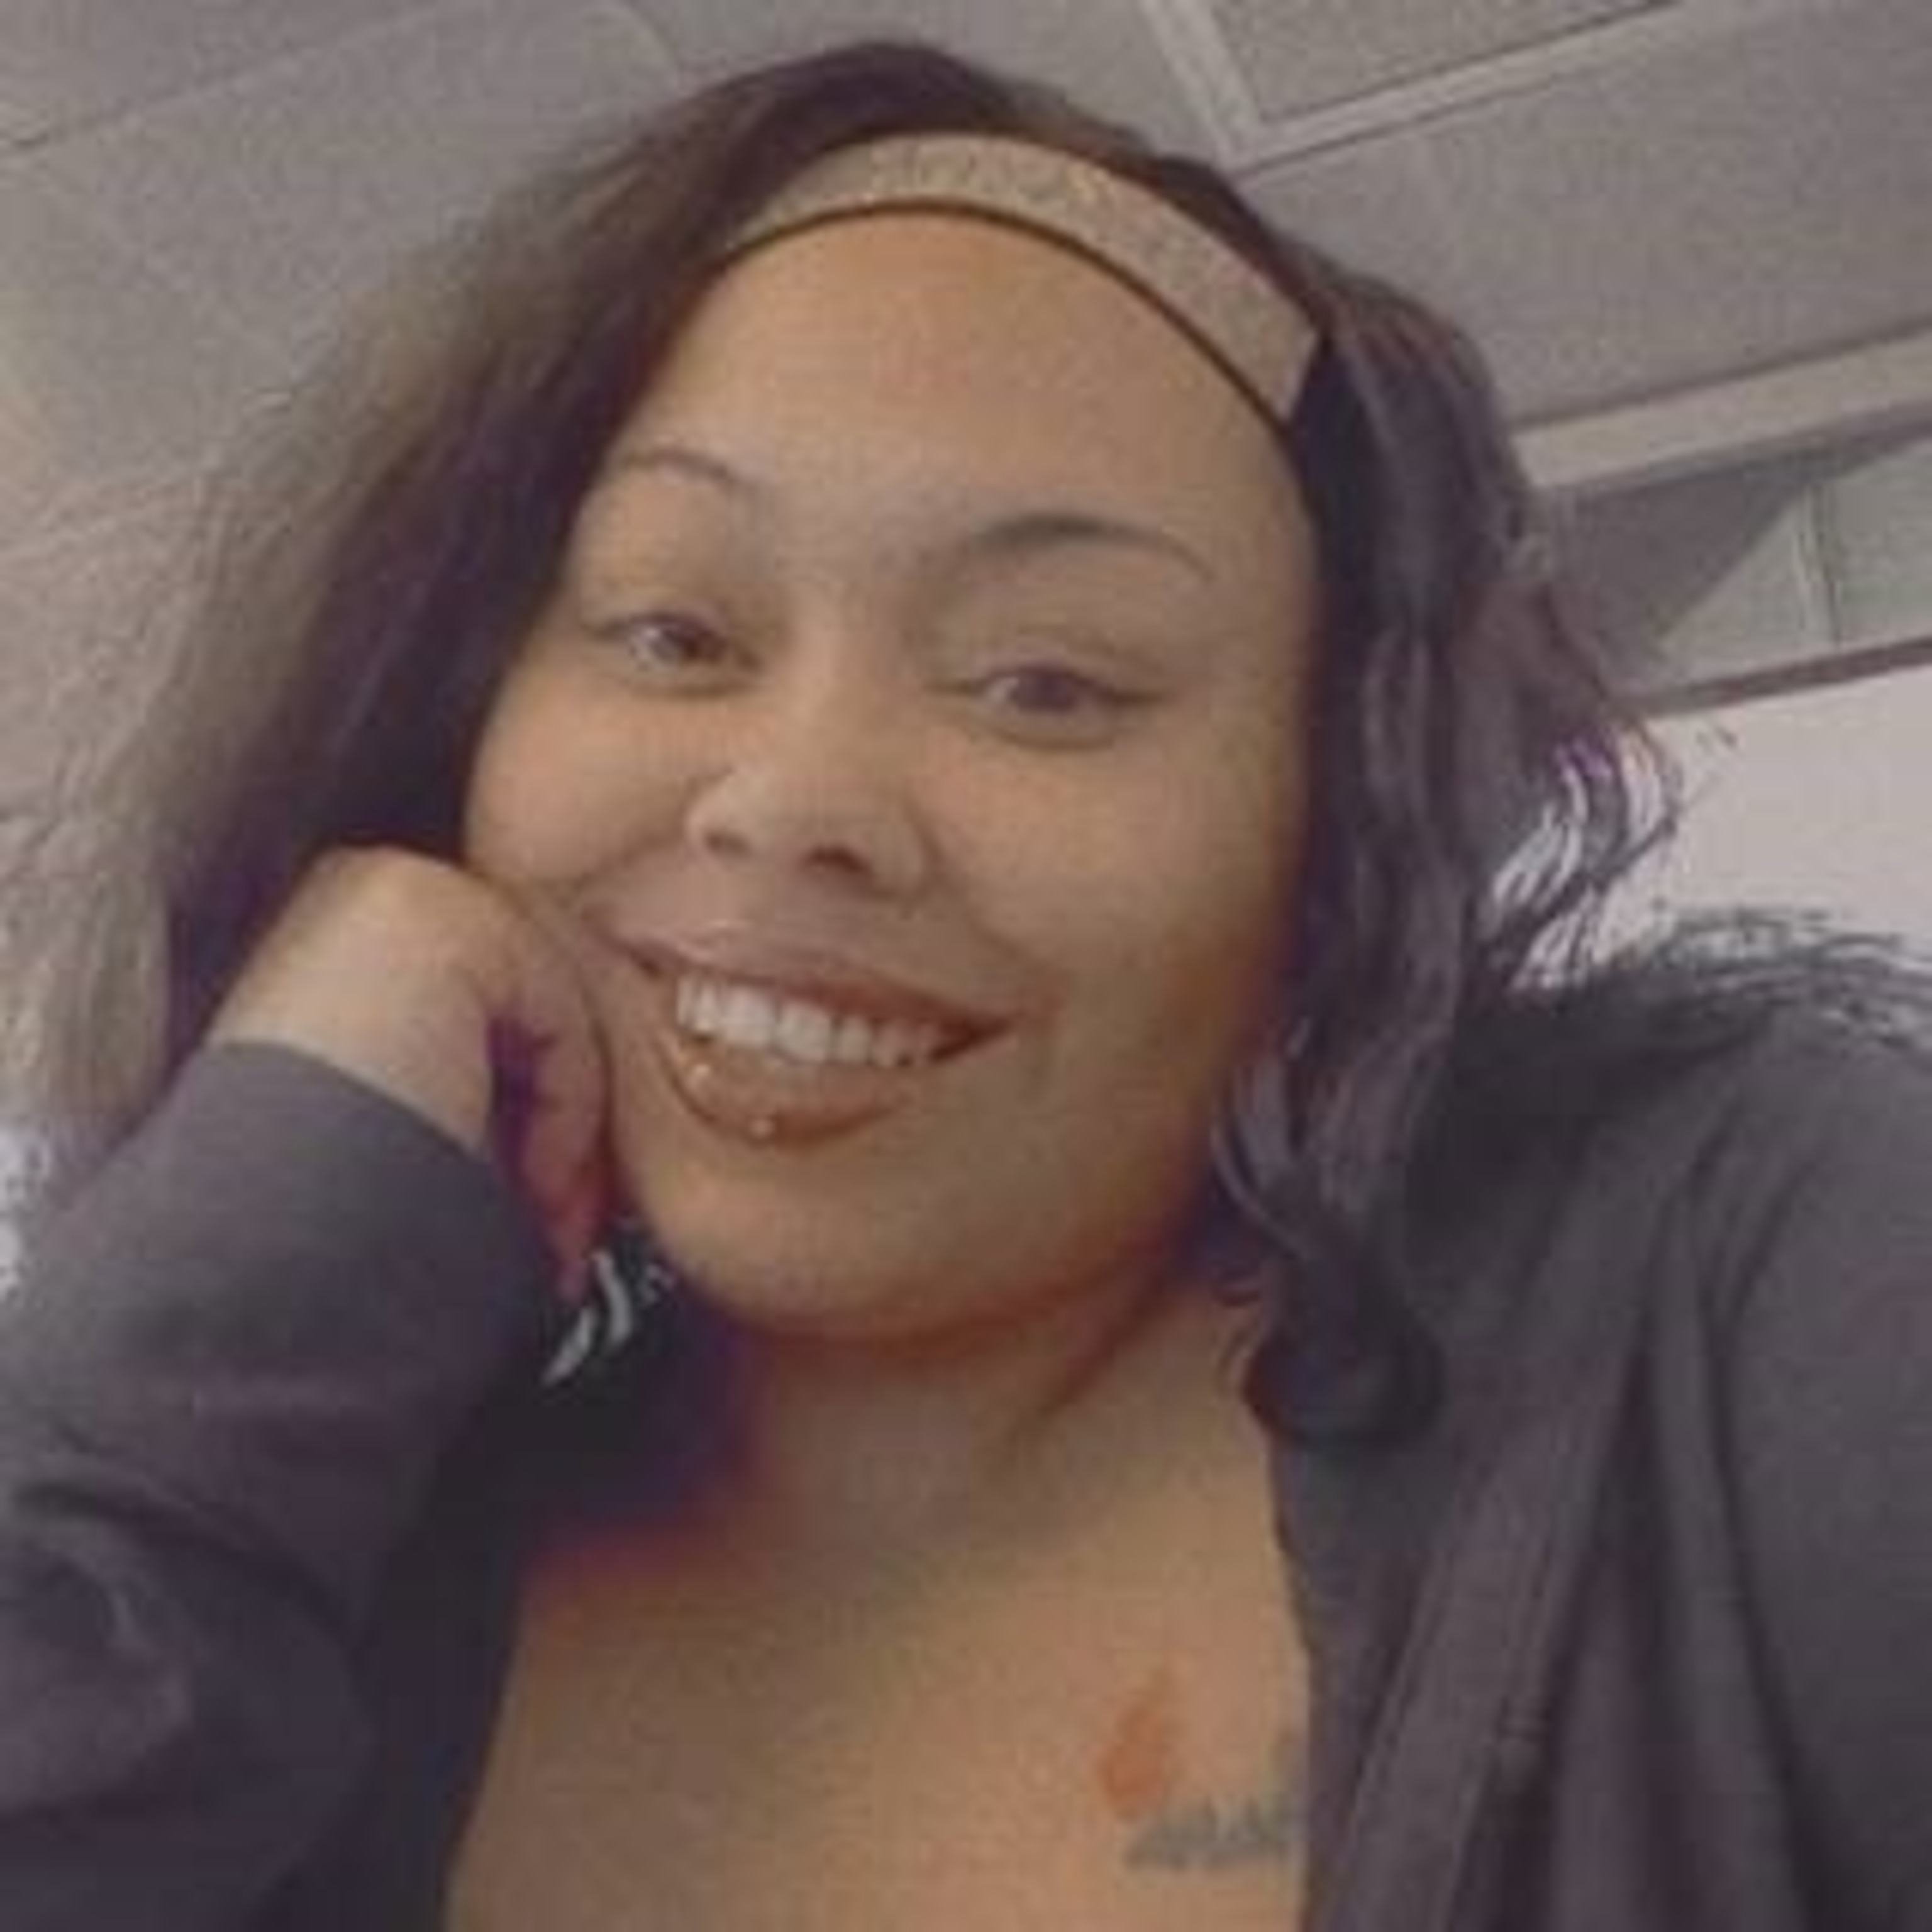 PHOTO: Marissa Kay Carmichael is pictured in an undated photo provided by the Greensboro Police Department.